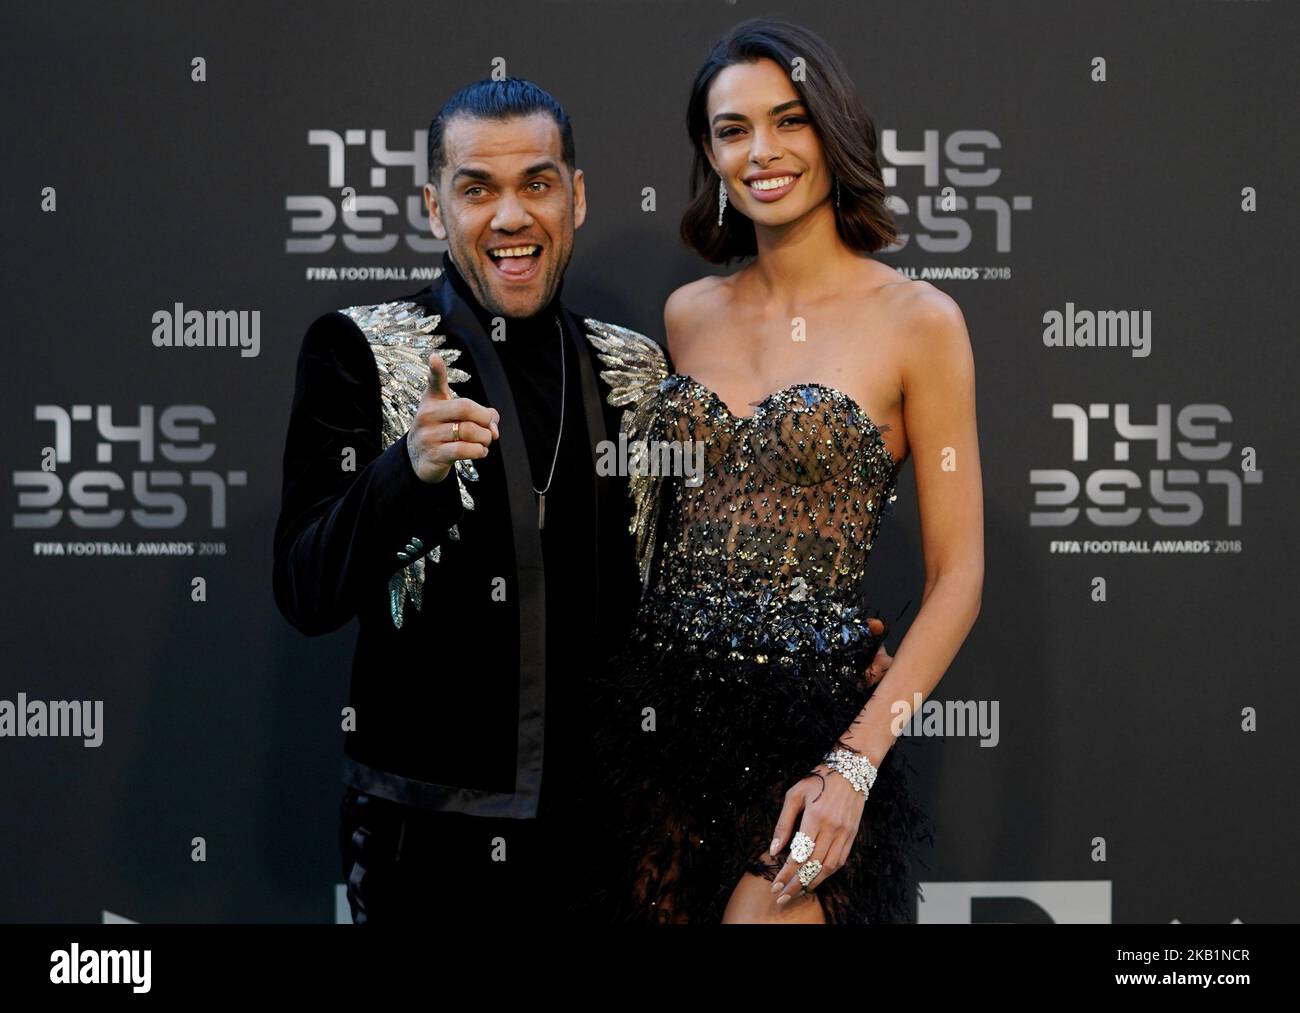 Dani Alves (Left) is a Brazilian professional footballer who plays as a right back for French club Paris Saint-Germain and the Brazil national team during The Best FIFA Football Awards at Royal Festival Hall on September 24, 2018 in London, England. (Photo by Action Foto Sport/NurPhoto)  Stock Photo